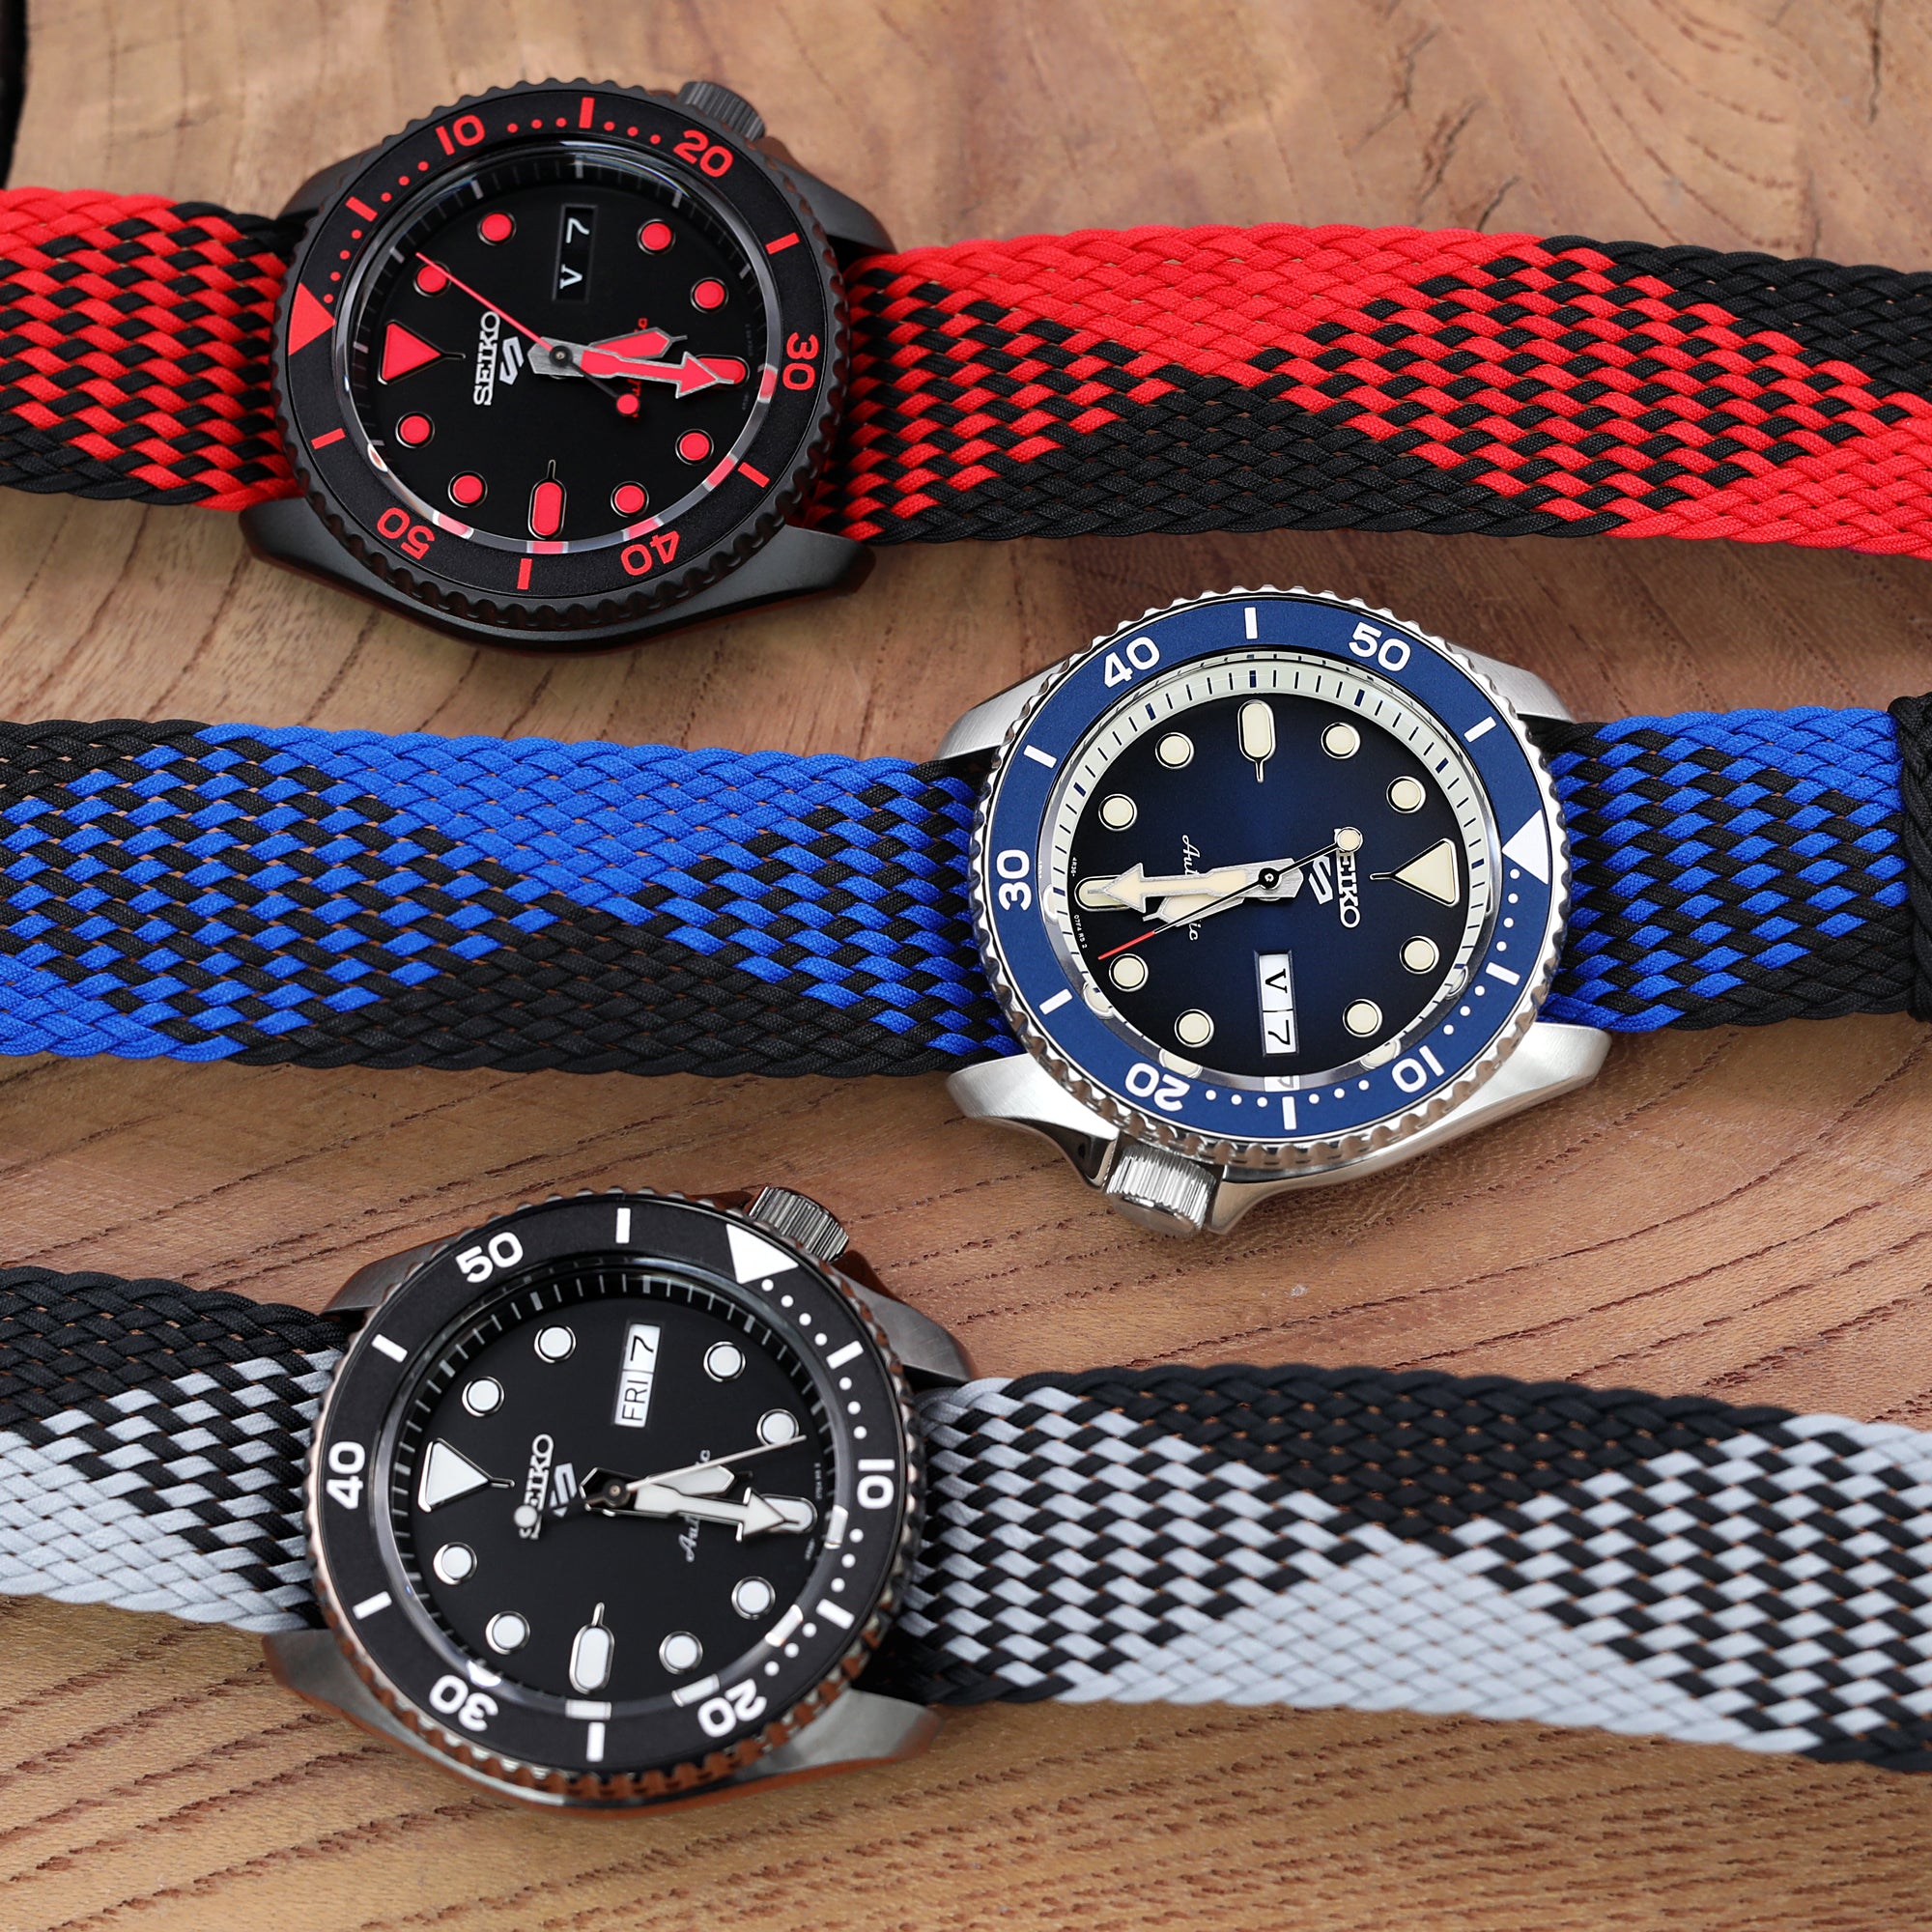 What Do You Look For In A Perlon Watch Strap?